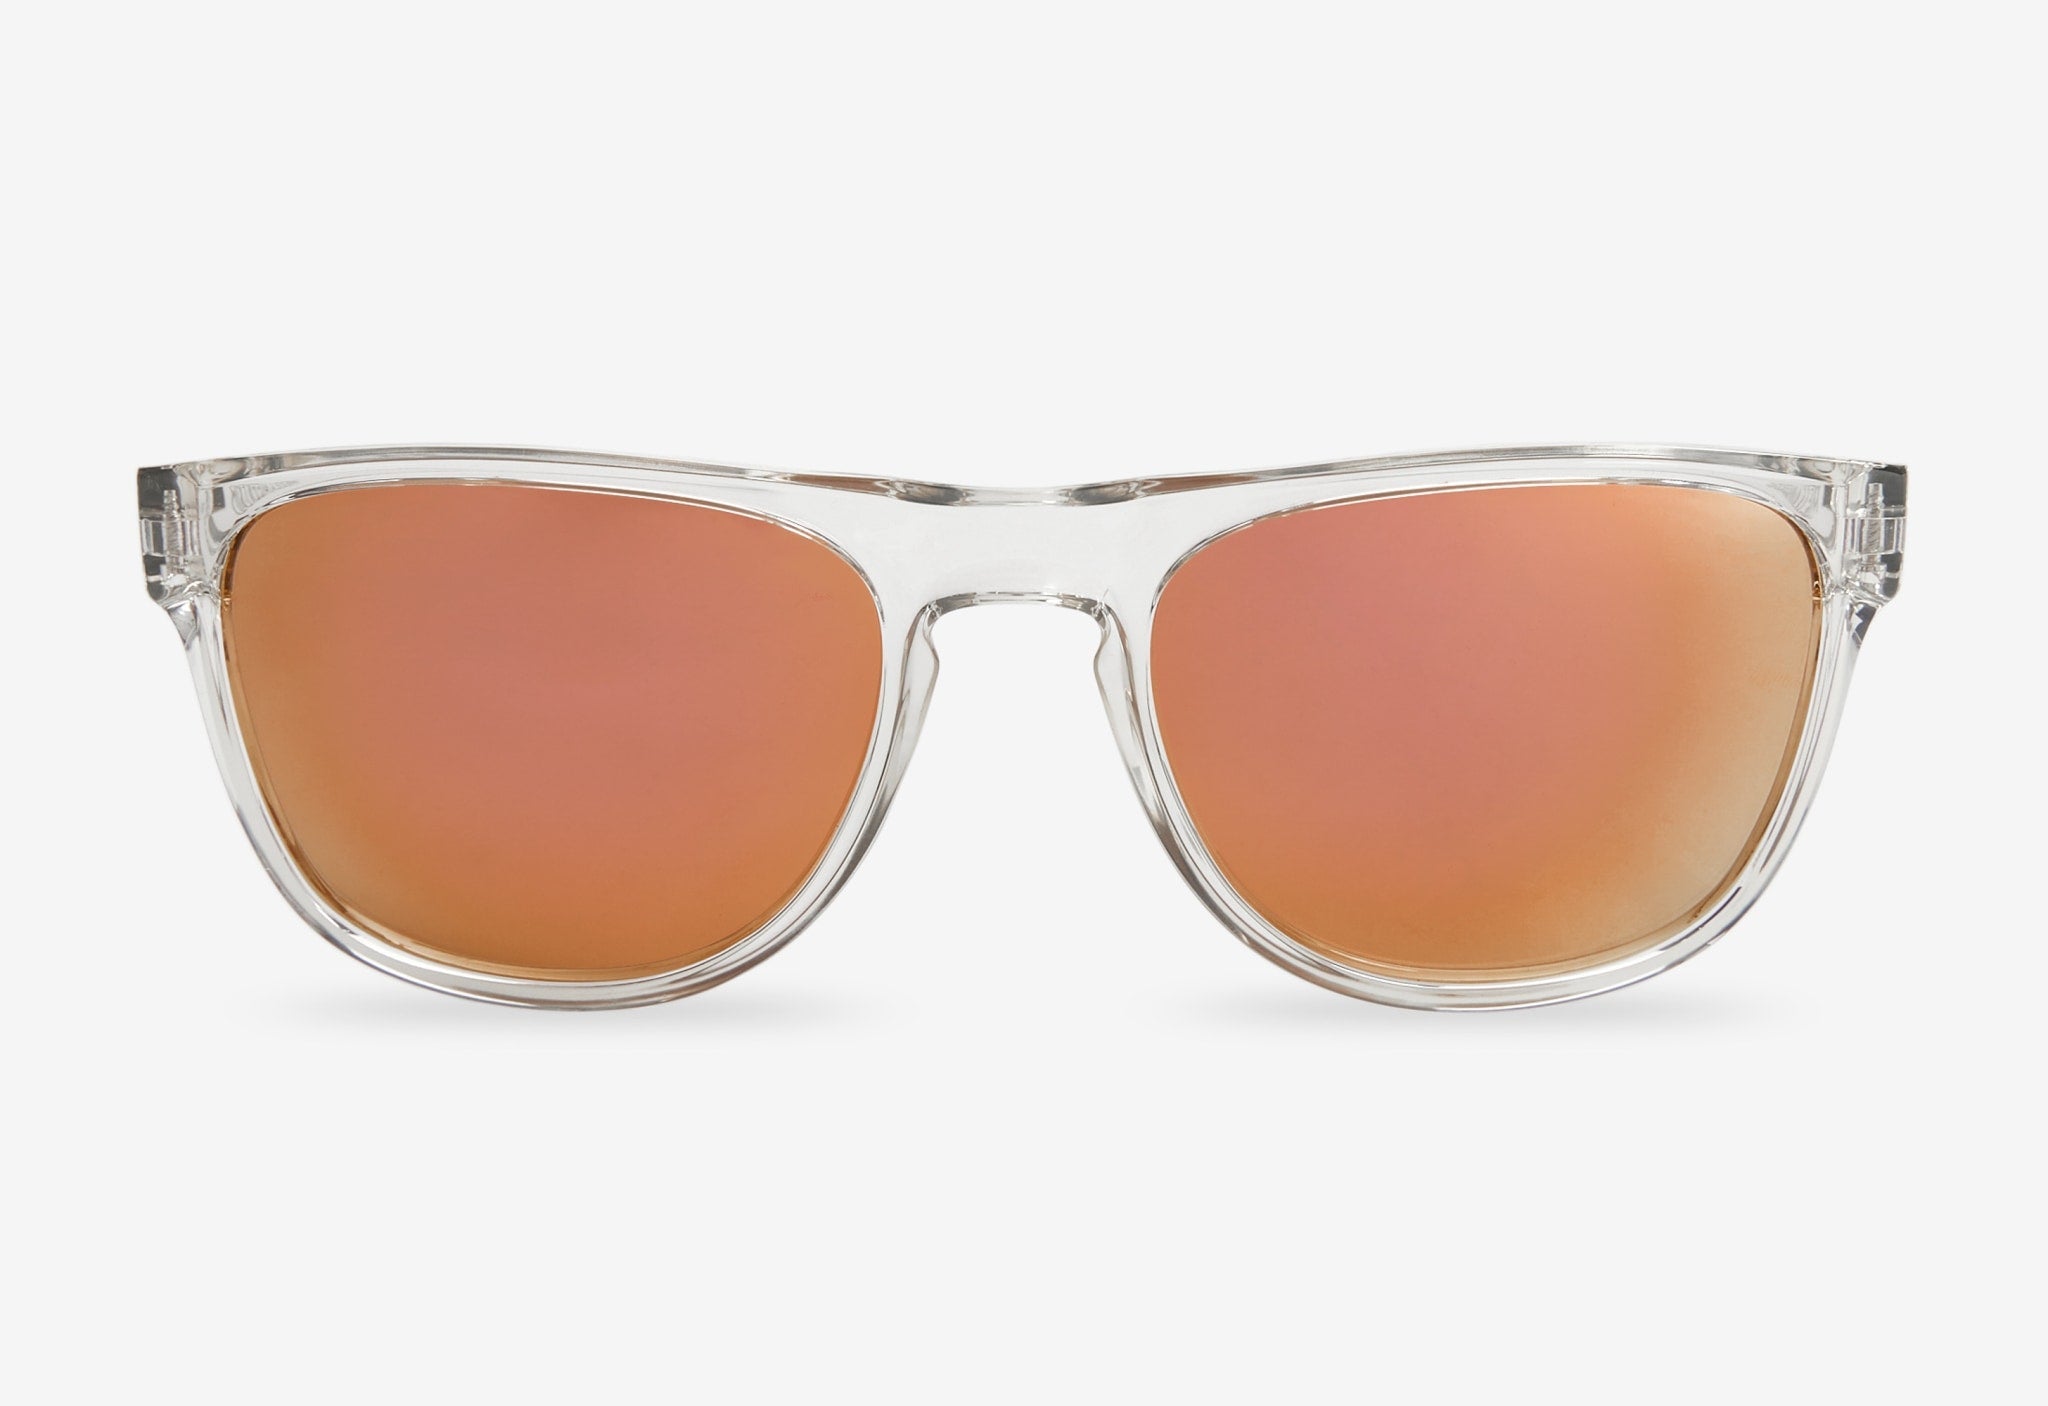 Flat top polarized sunglasses with pink lens | MessyWeekend